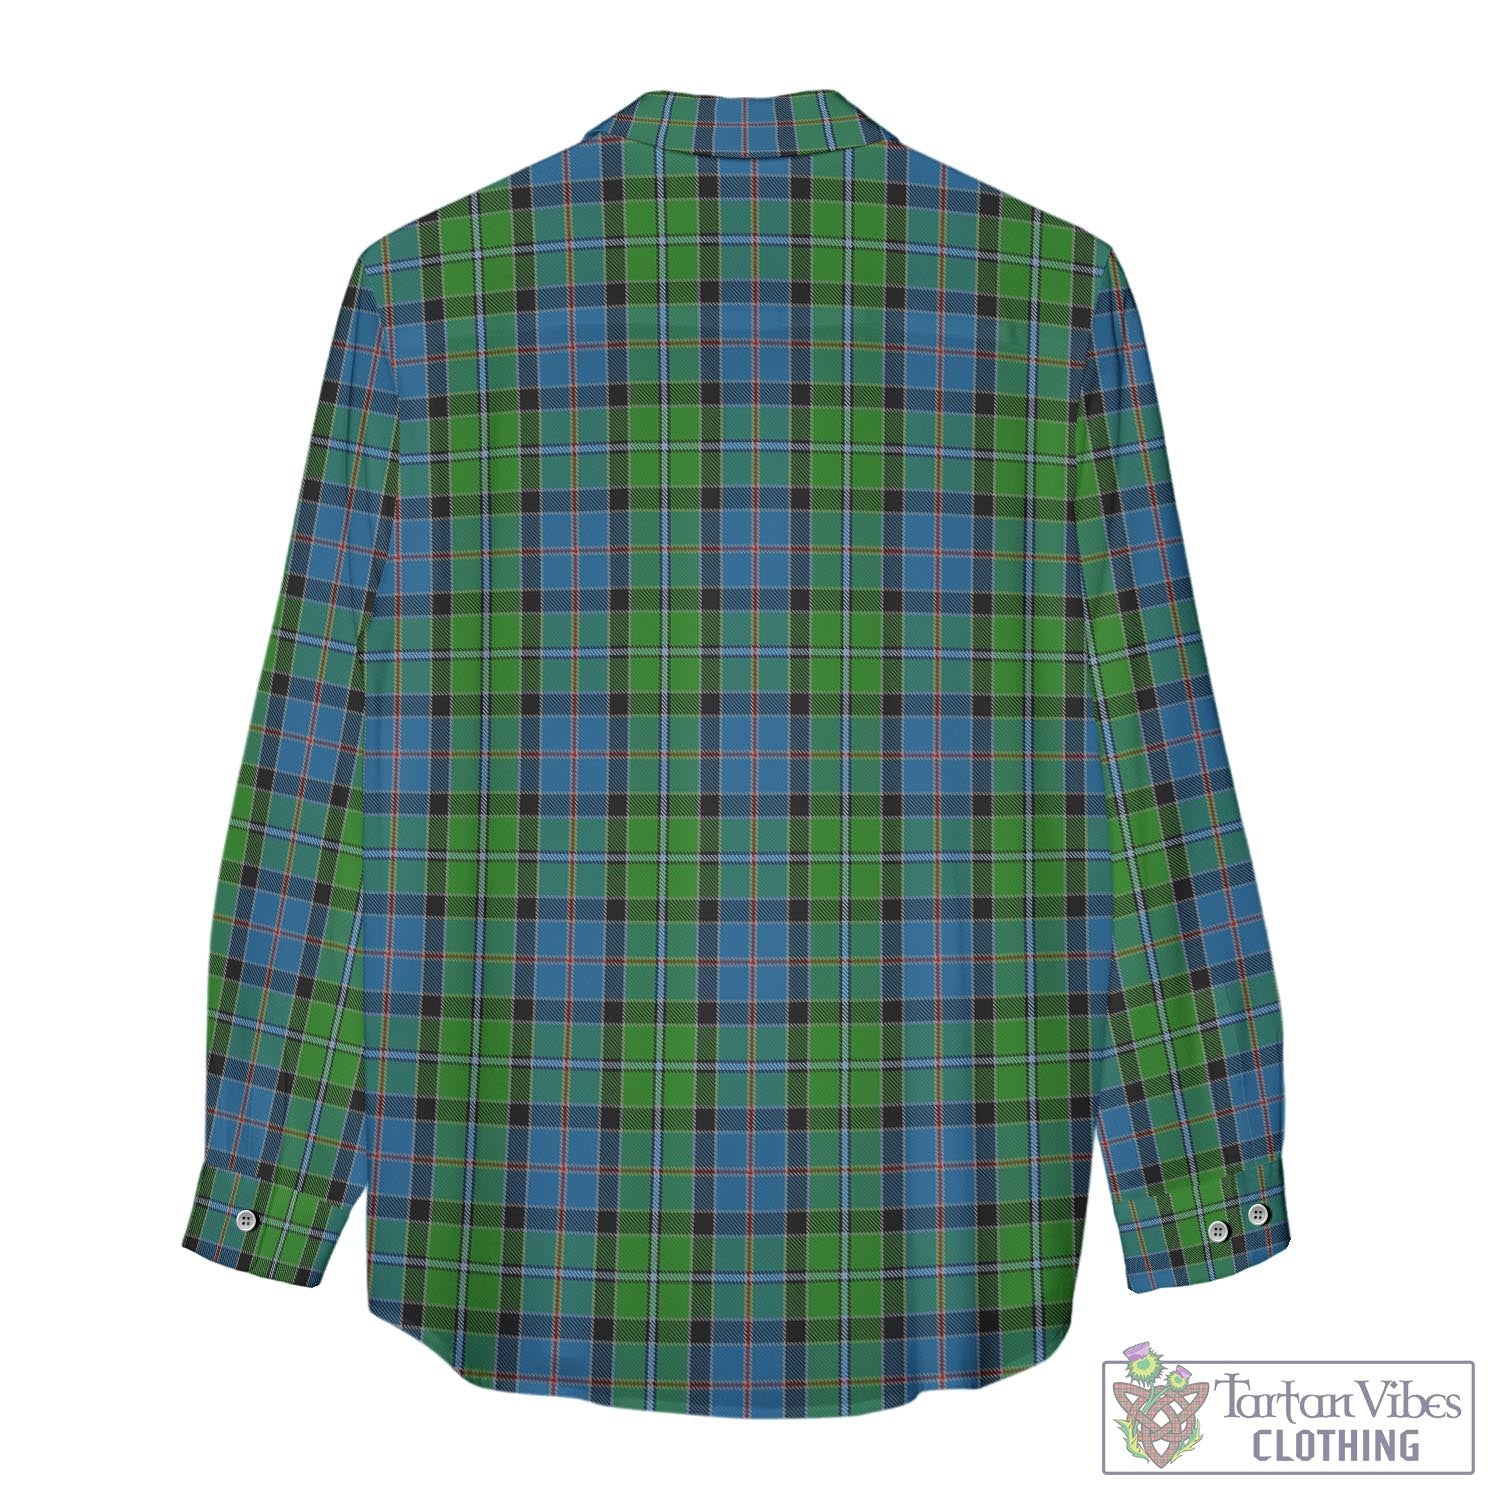 Tartan Vibes Clothing Stirling Tartan Womens Casual Shirt with Family Crest